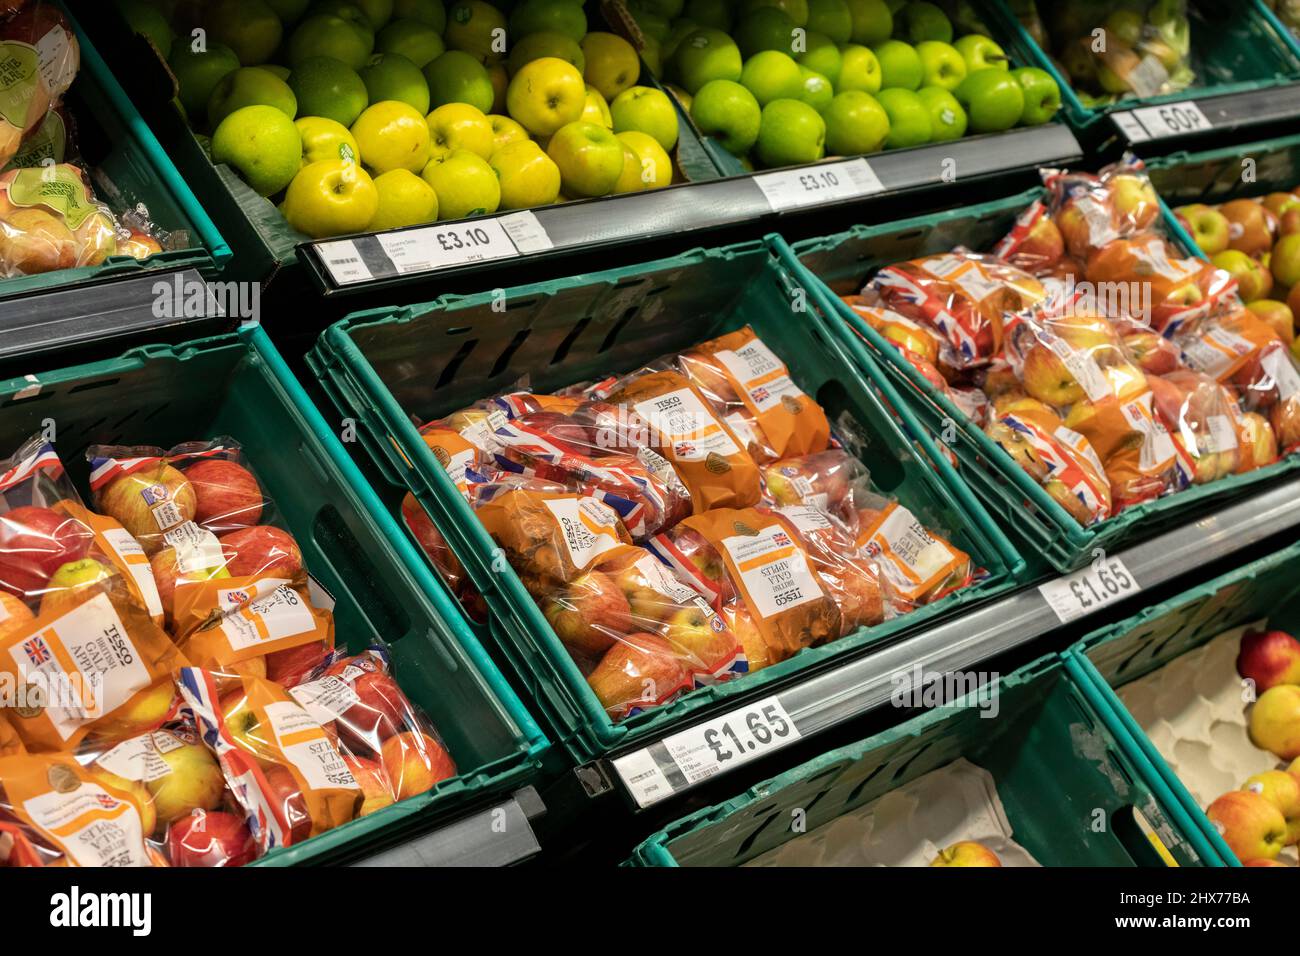 Prices of apples as seen on the shelves of a Tesco supermarket.   Food prices, among other living costs, are said to spike in months coming up followi Stock Photo